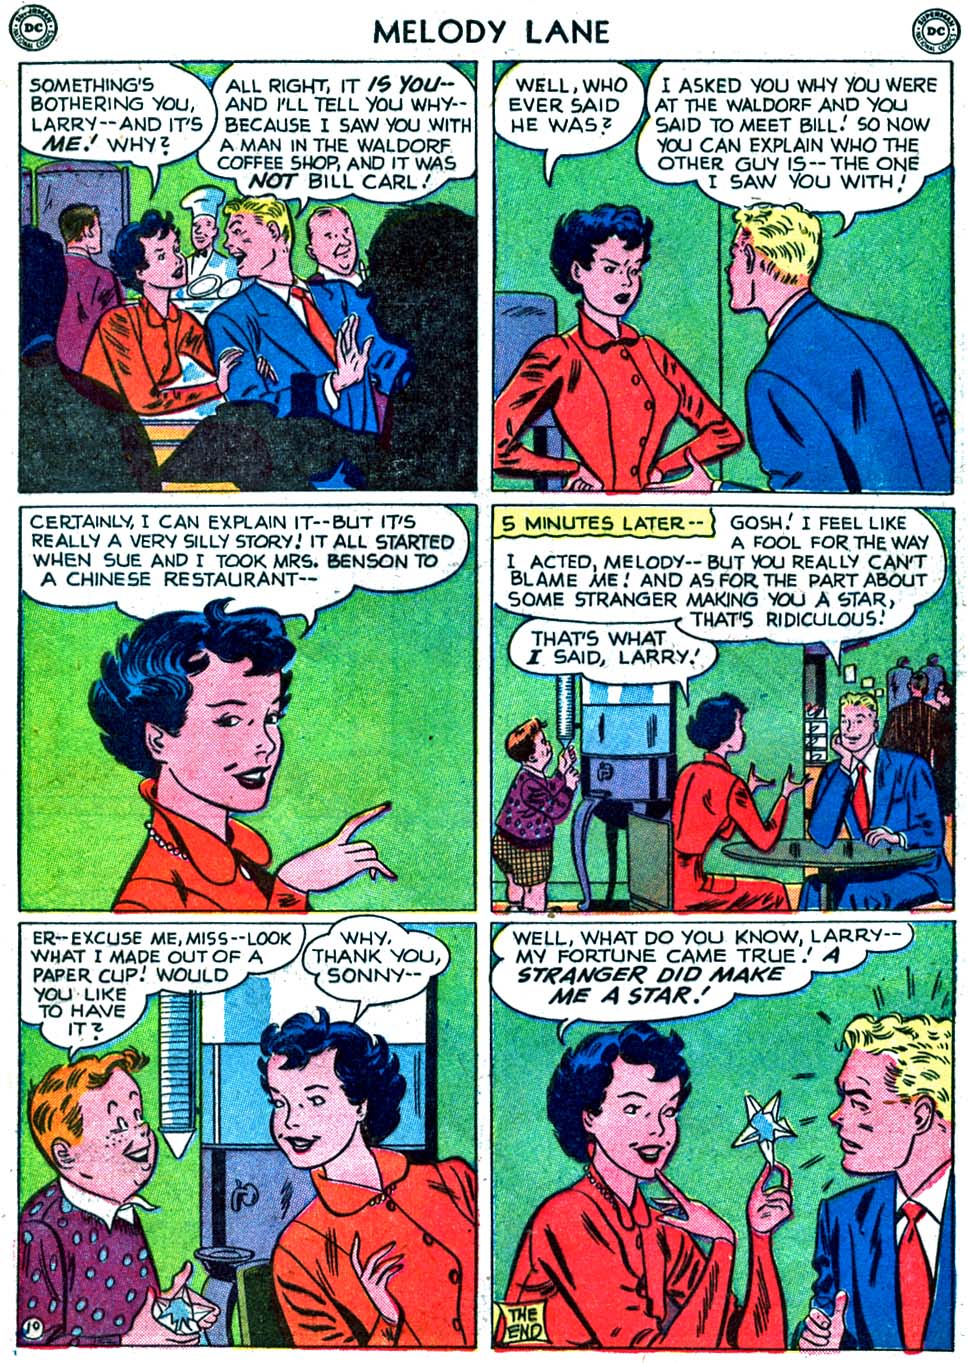 Read online Miss Melody Lane of Broadway comic -  Issue #2 - 12